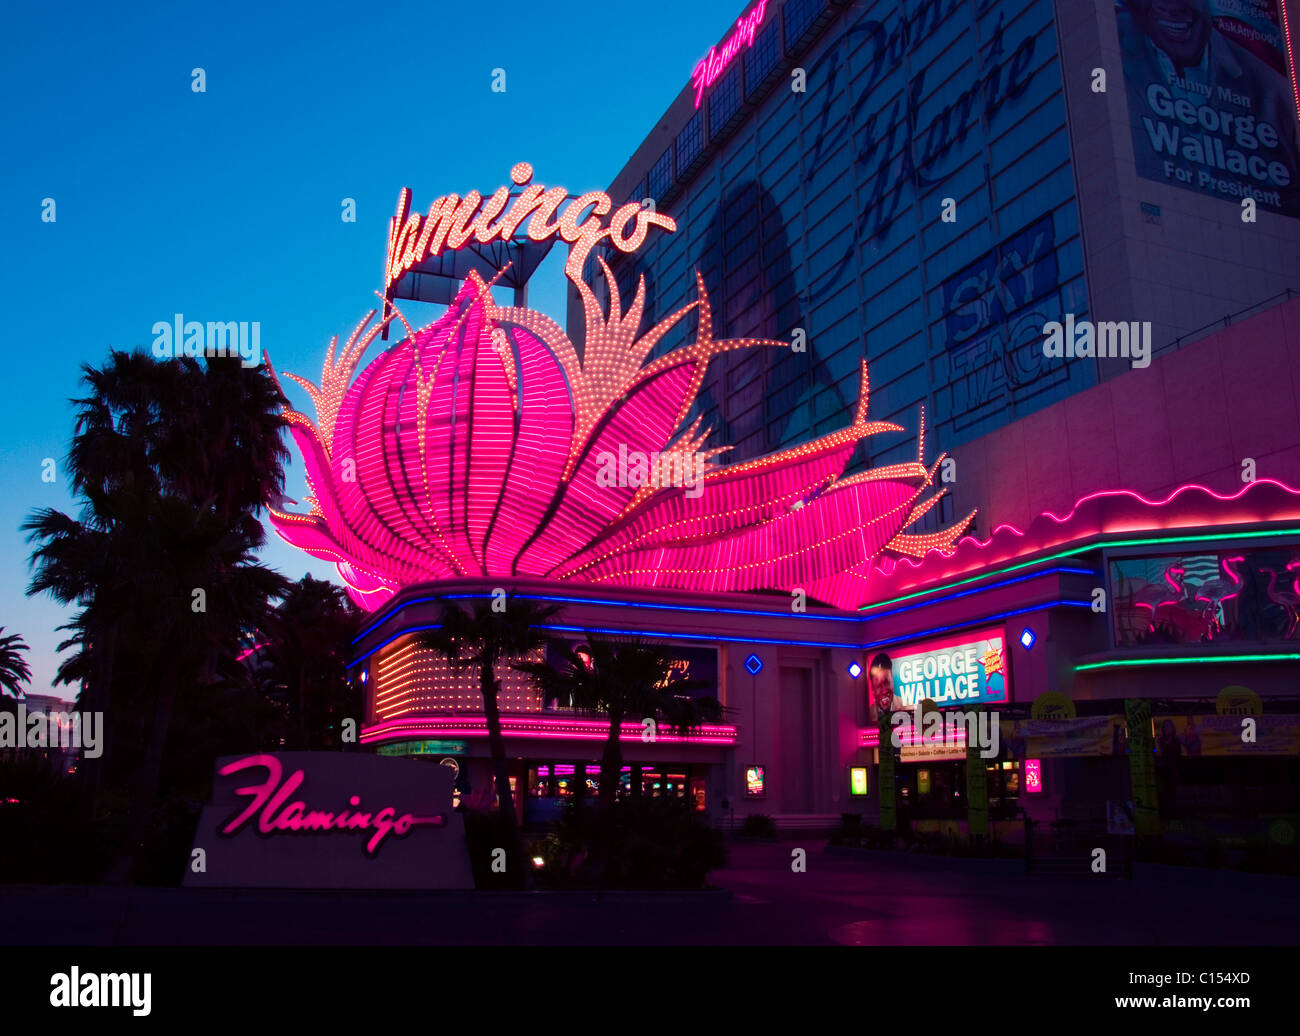 Neon sign over entrance to The Flamingo Hotel Casino Stock Photo